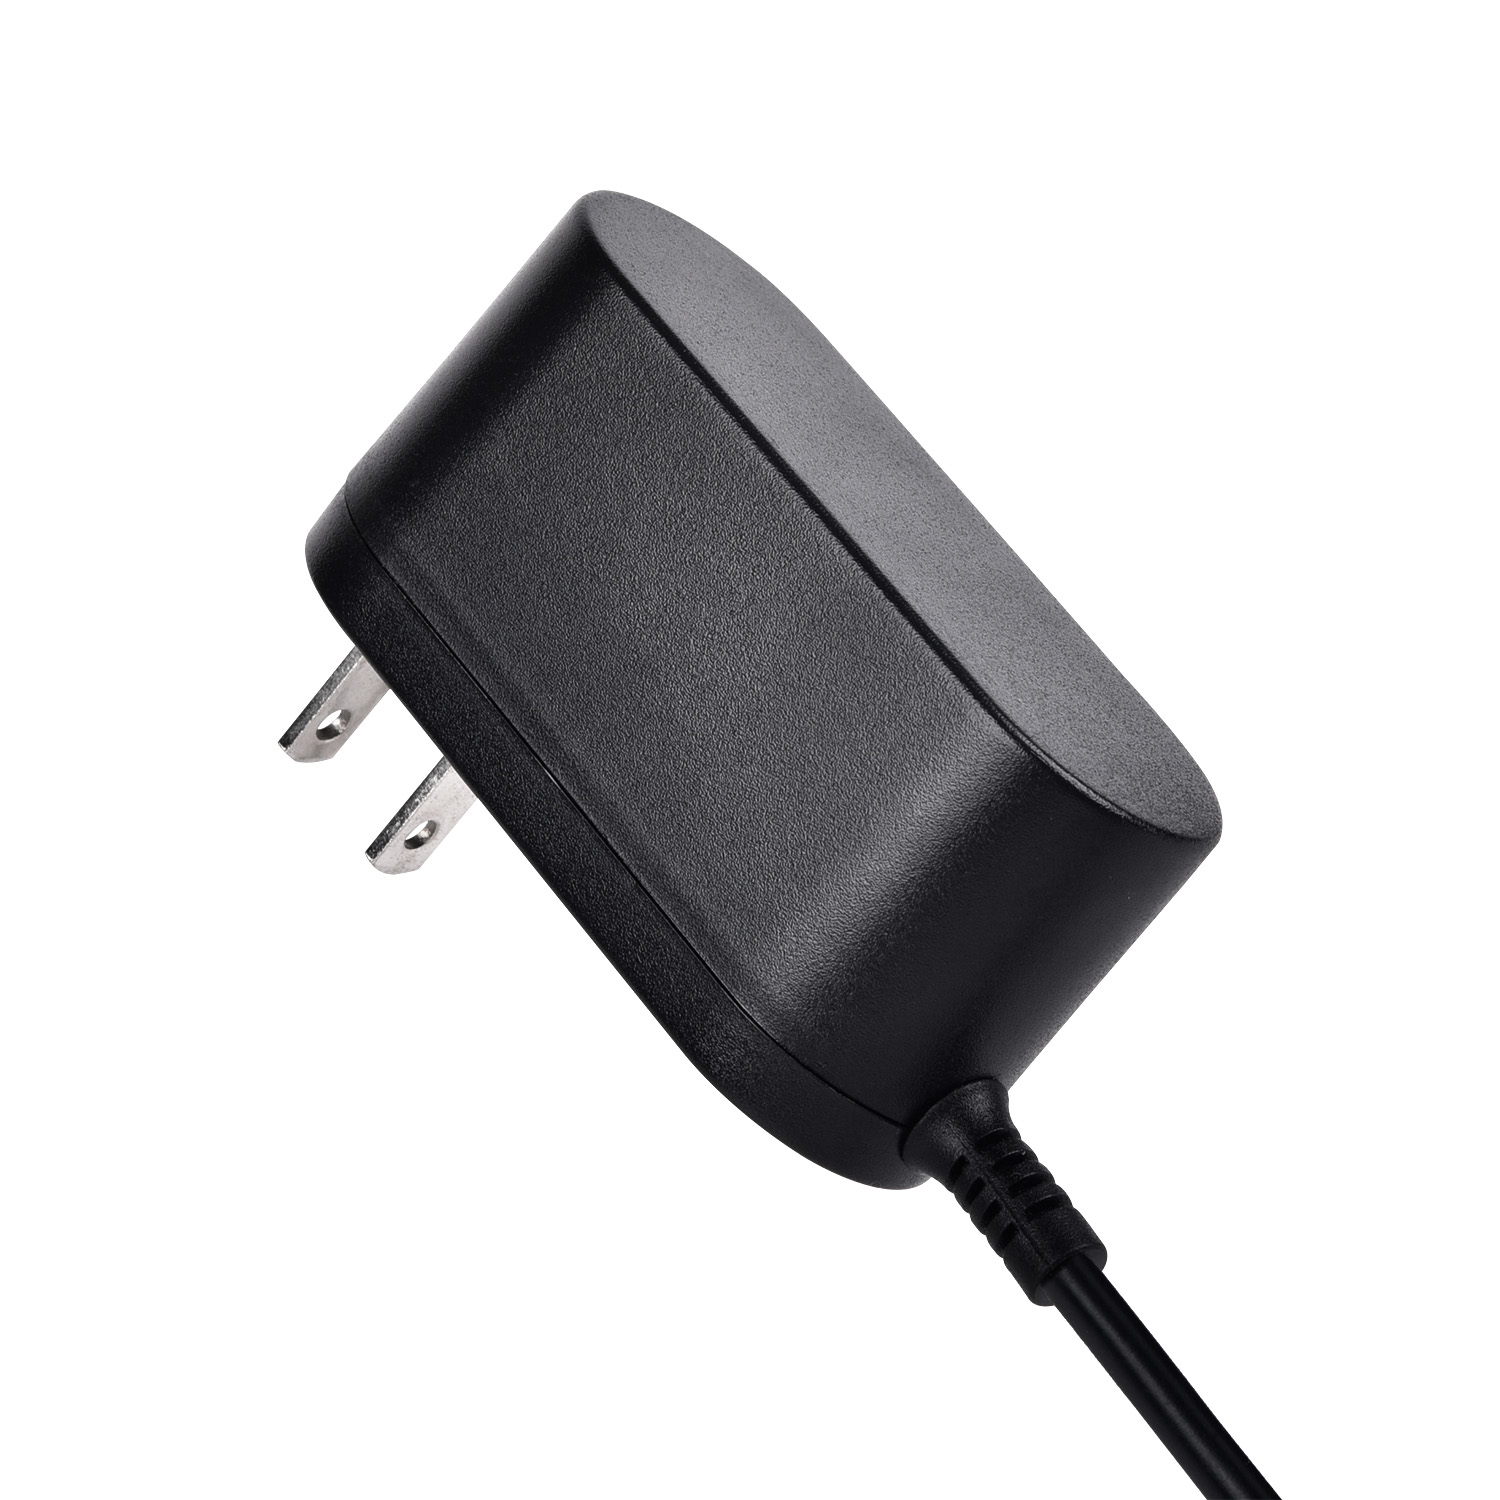 dc 12v power adapter 12v 2.5a power supply with 3 years warranty